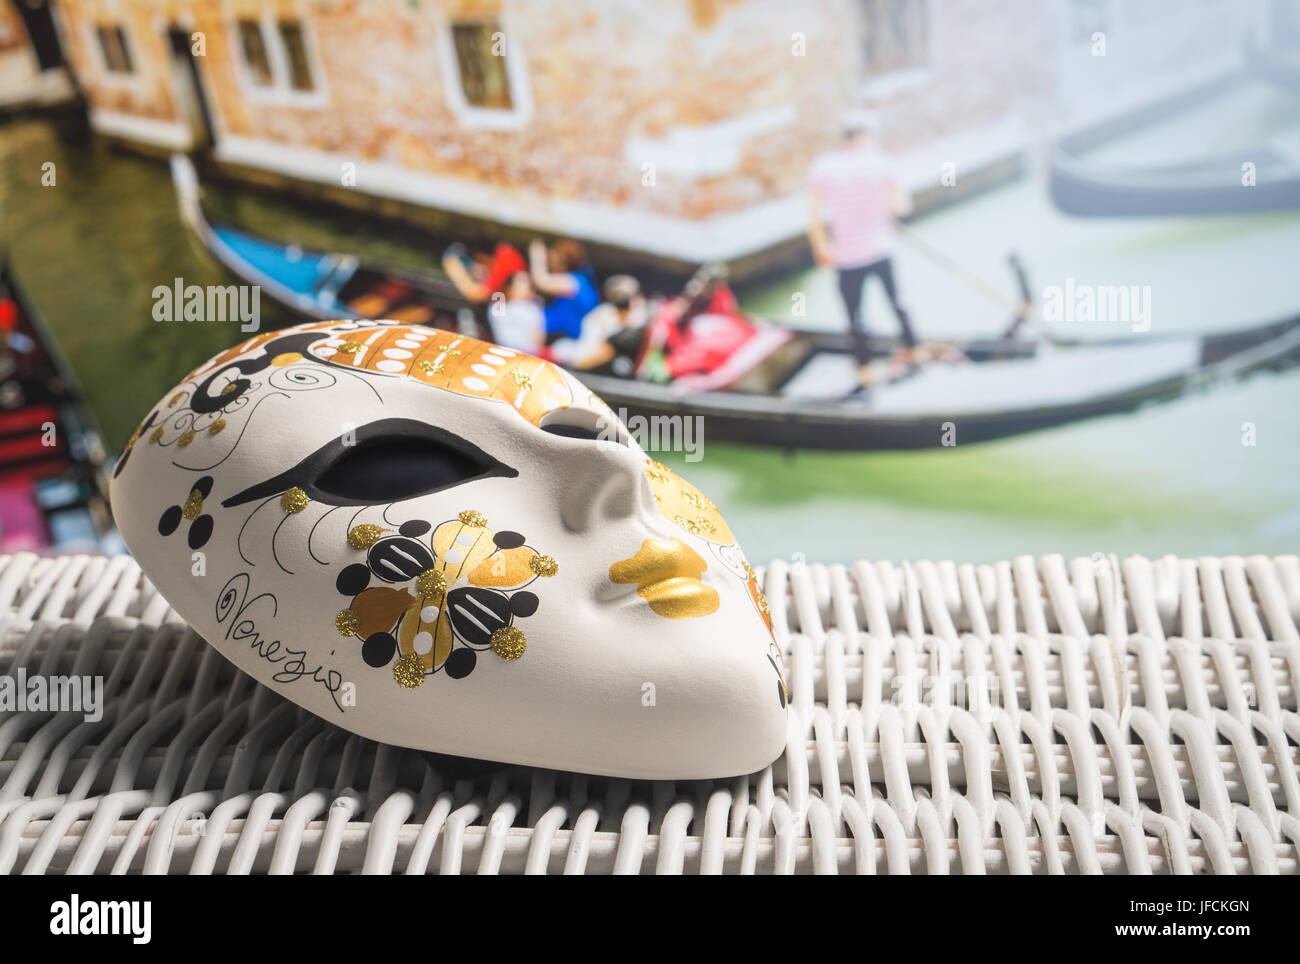 Authentic mask from Venice with a gondolier and tourists in gondola in the background. Golden souvenir and traditional Venetian boat in the canal. Stock Photo